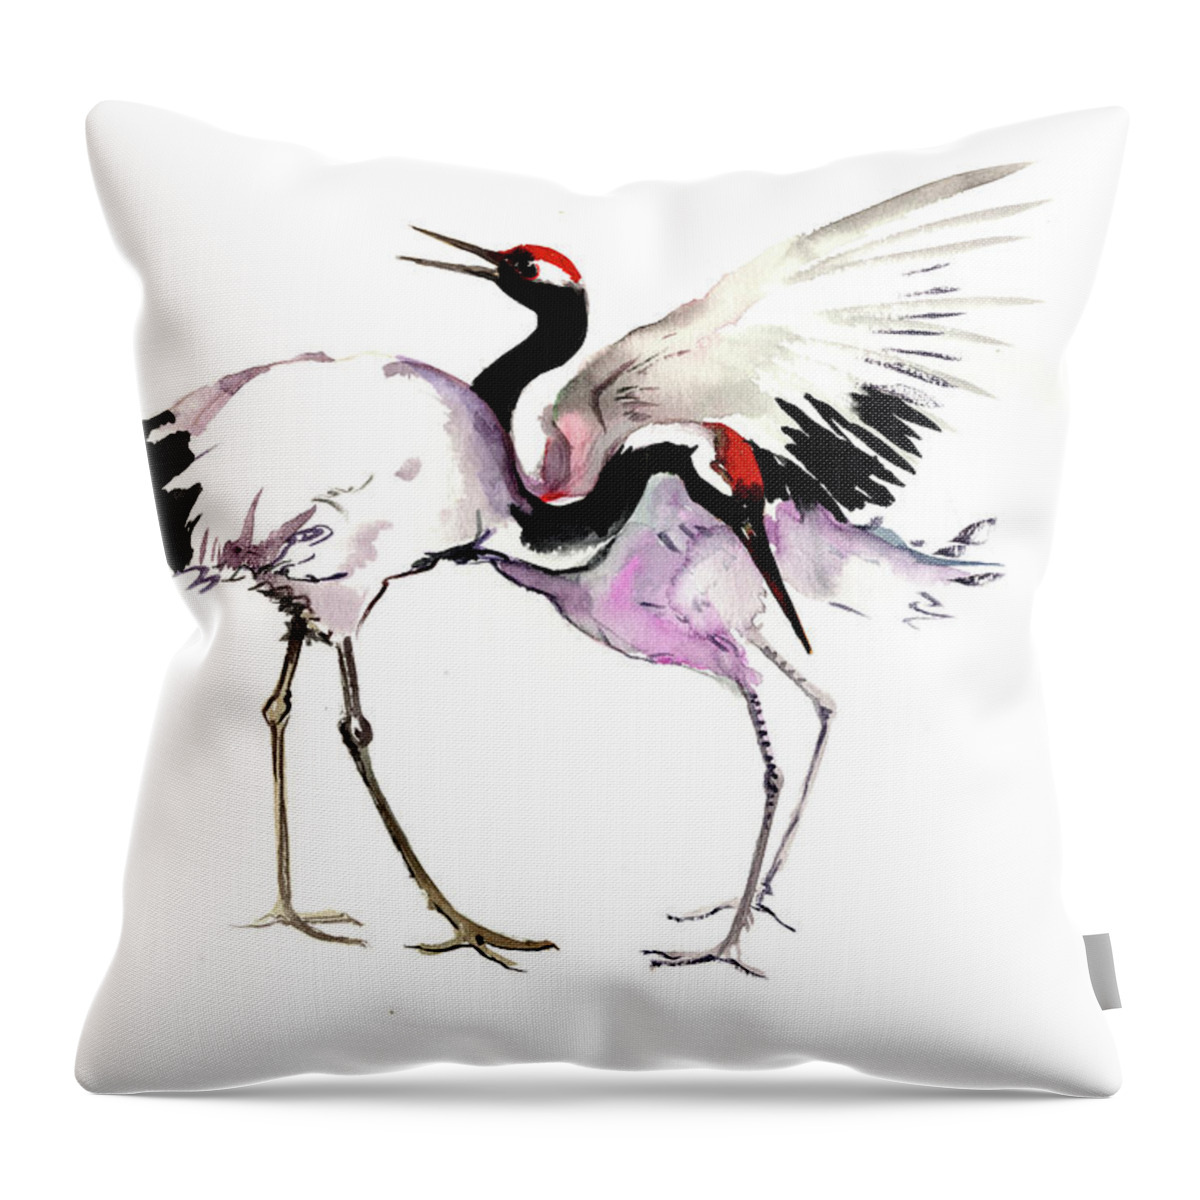 Japanese Throw Pillow featuring the painting Japanese Cranes by Suren Nersisyan